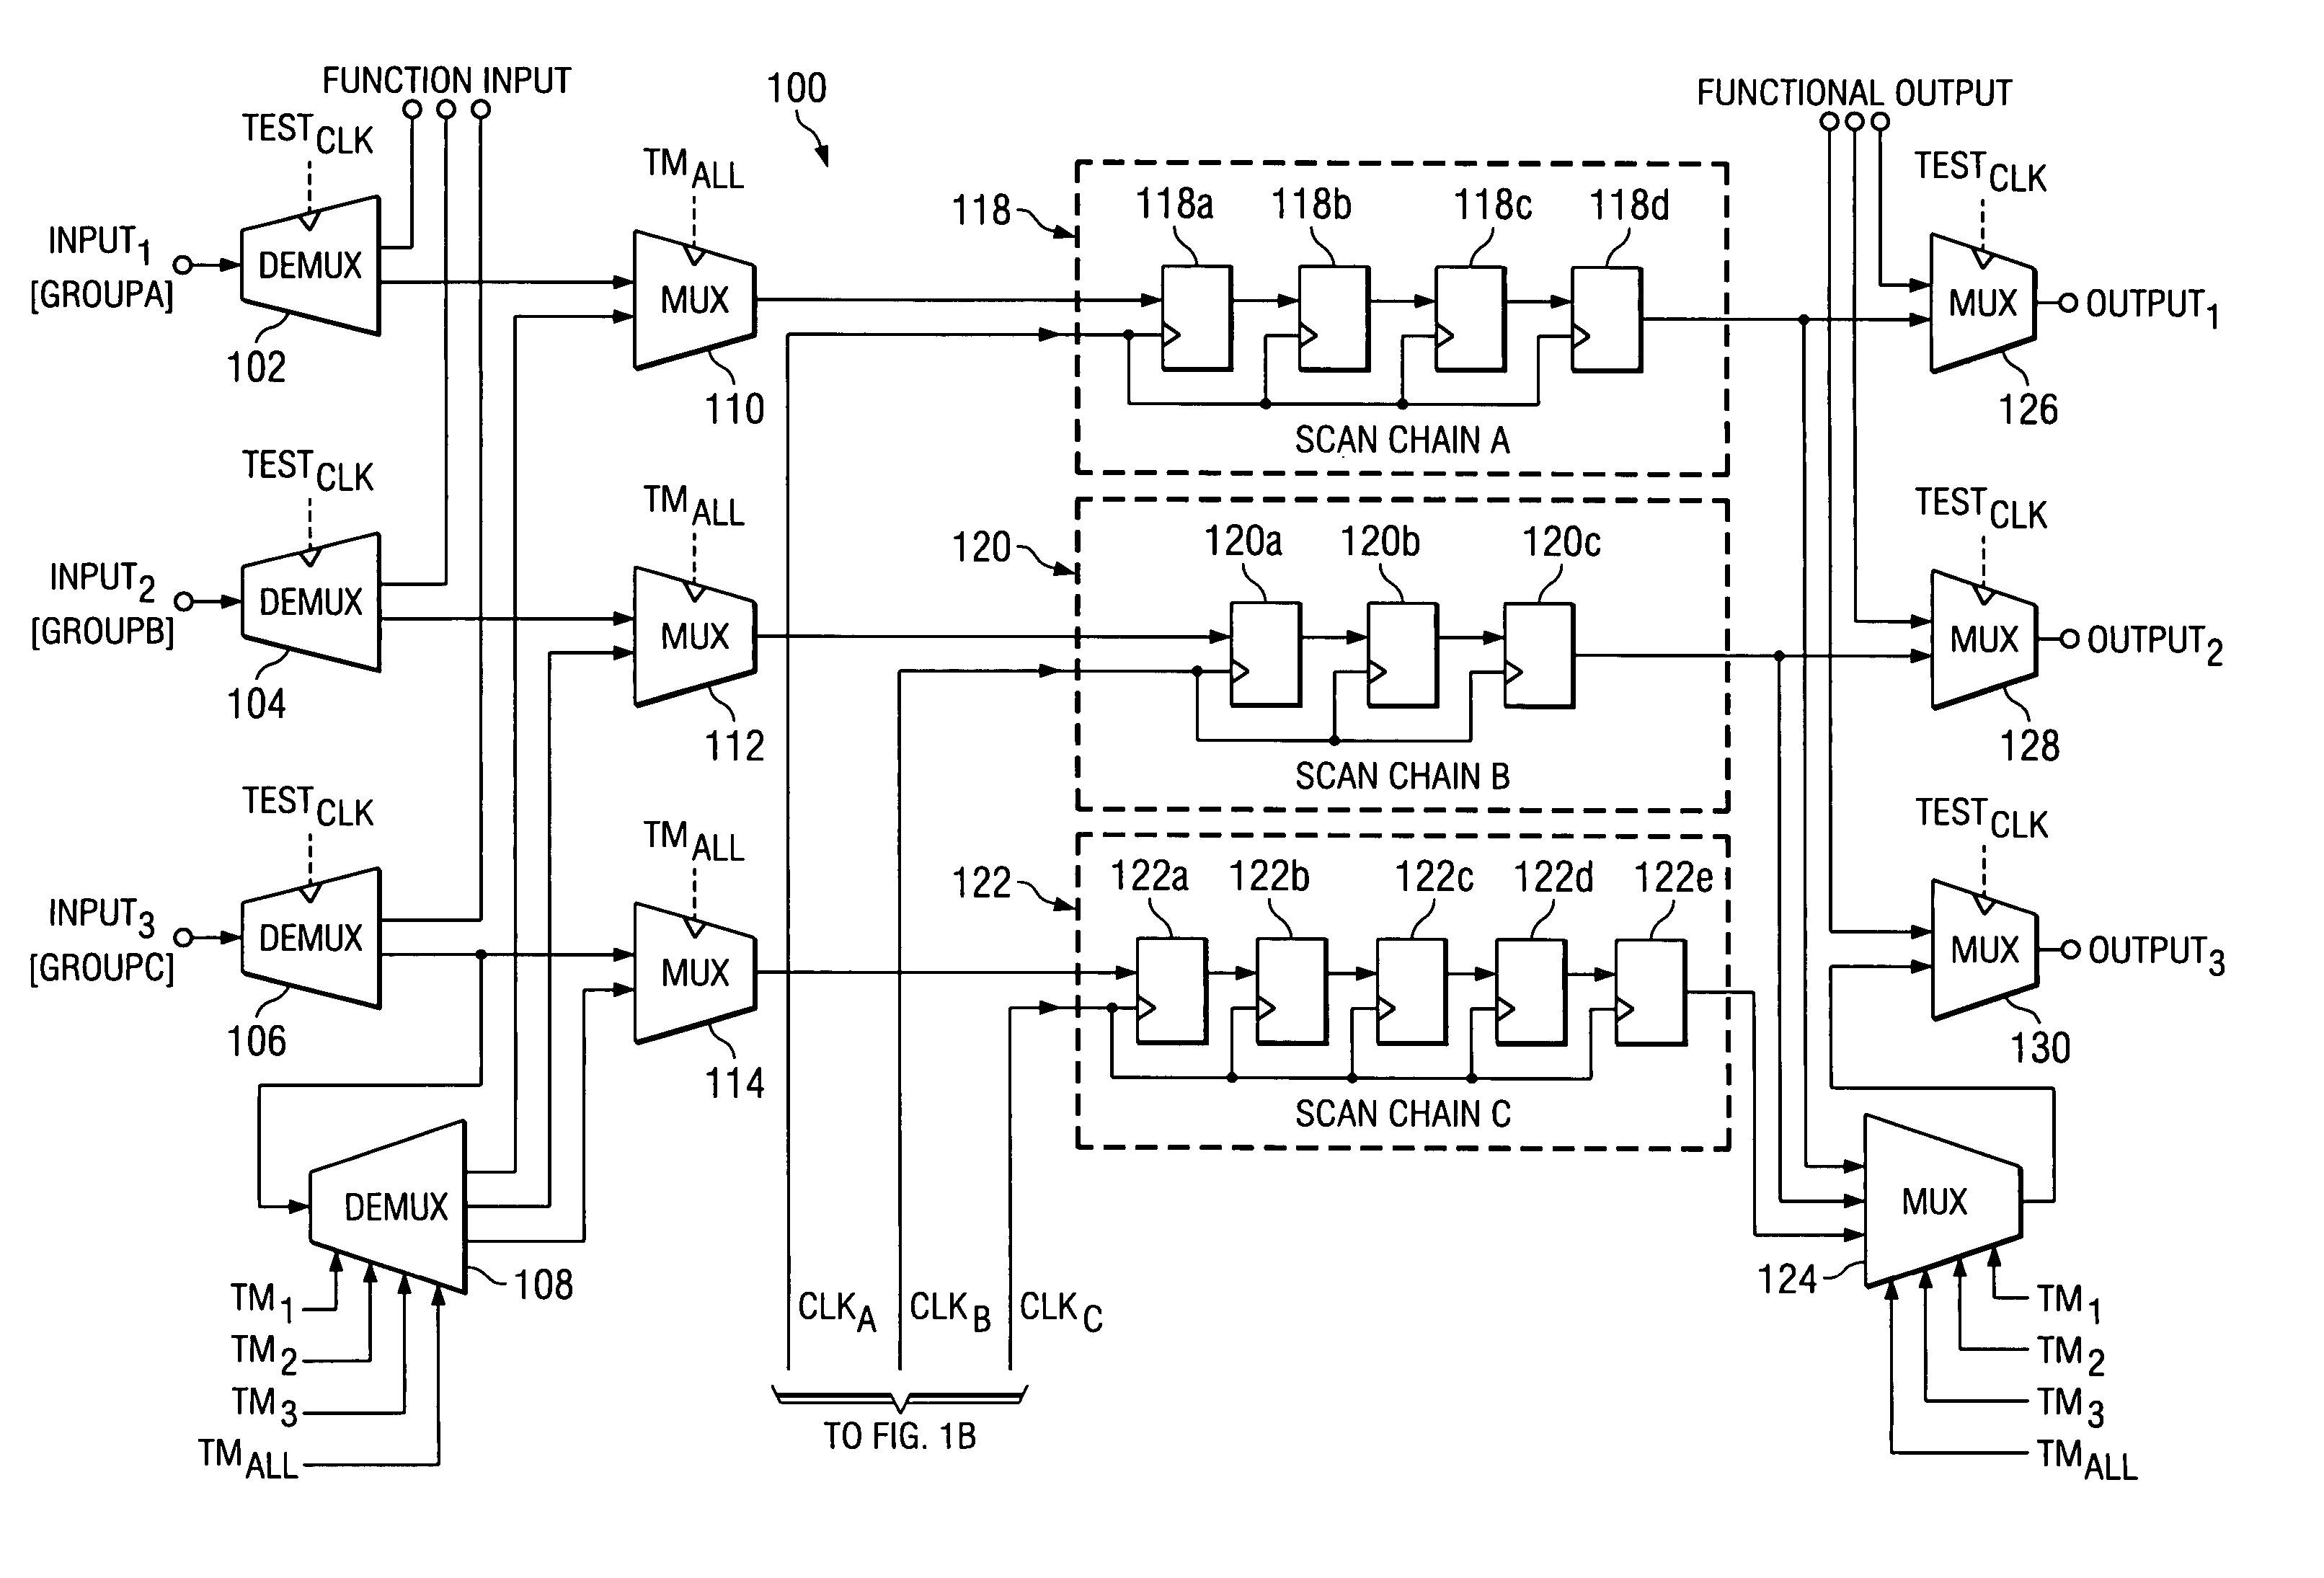 At-speed ATPG testing and apparatus for SoC designs having multiple clock domain using a VLCT test platform